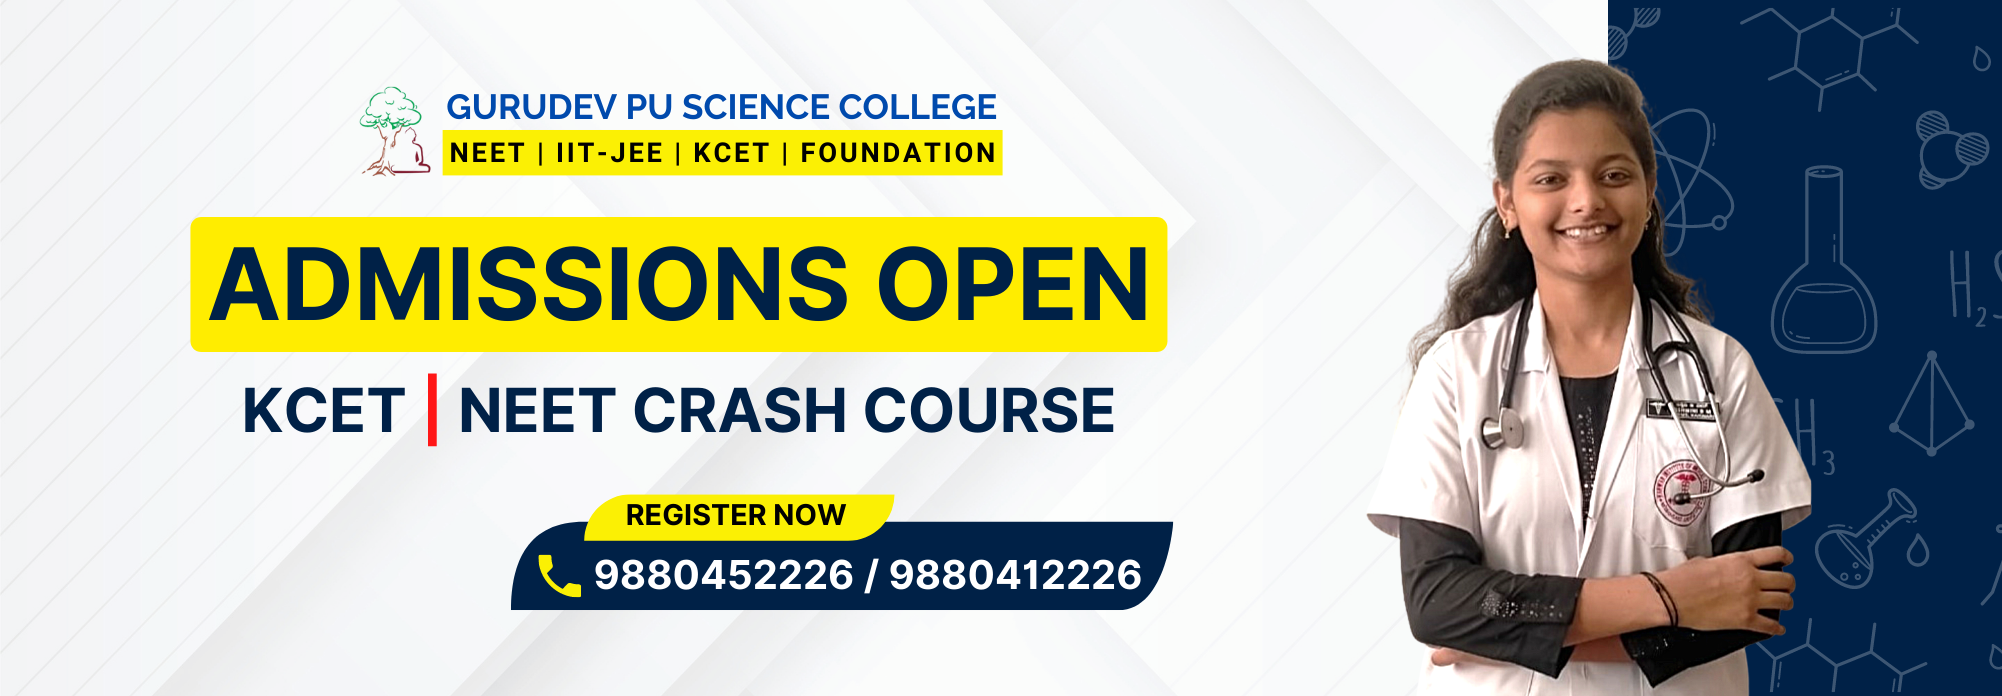 ADMISSIONS OPEN